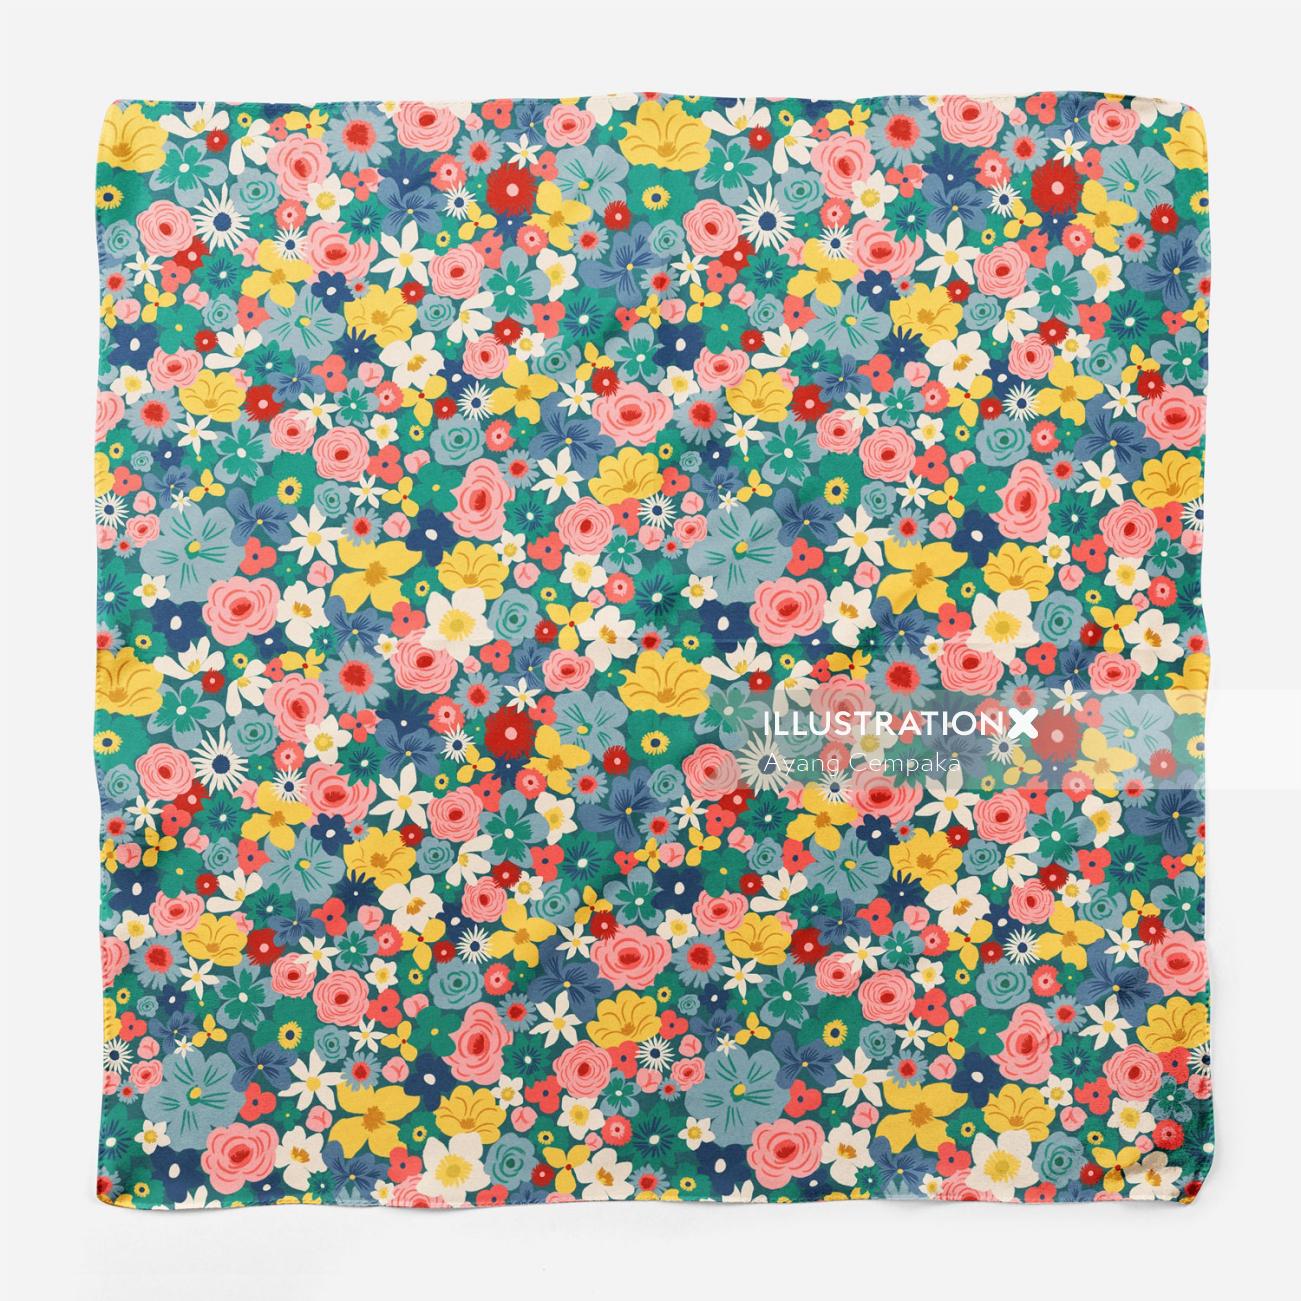 Colorful flowers gift wrapper
